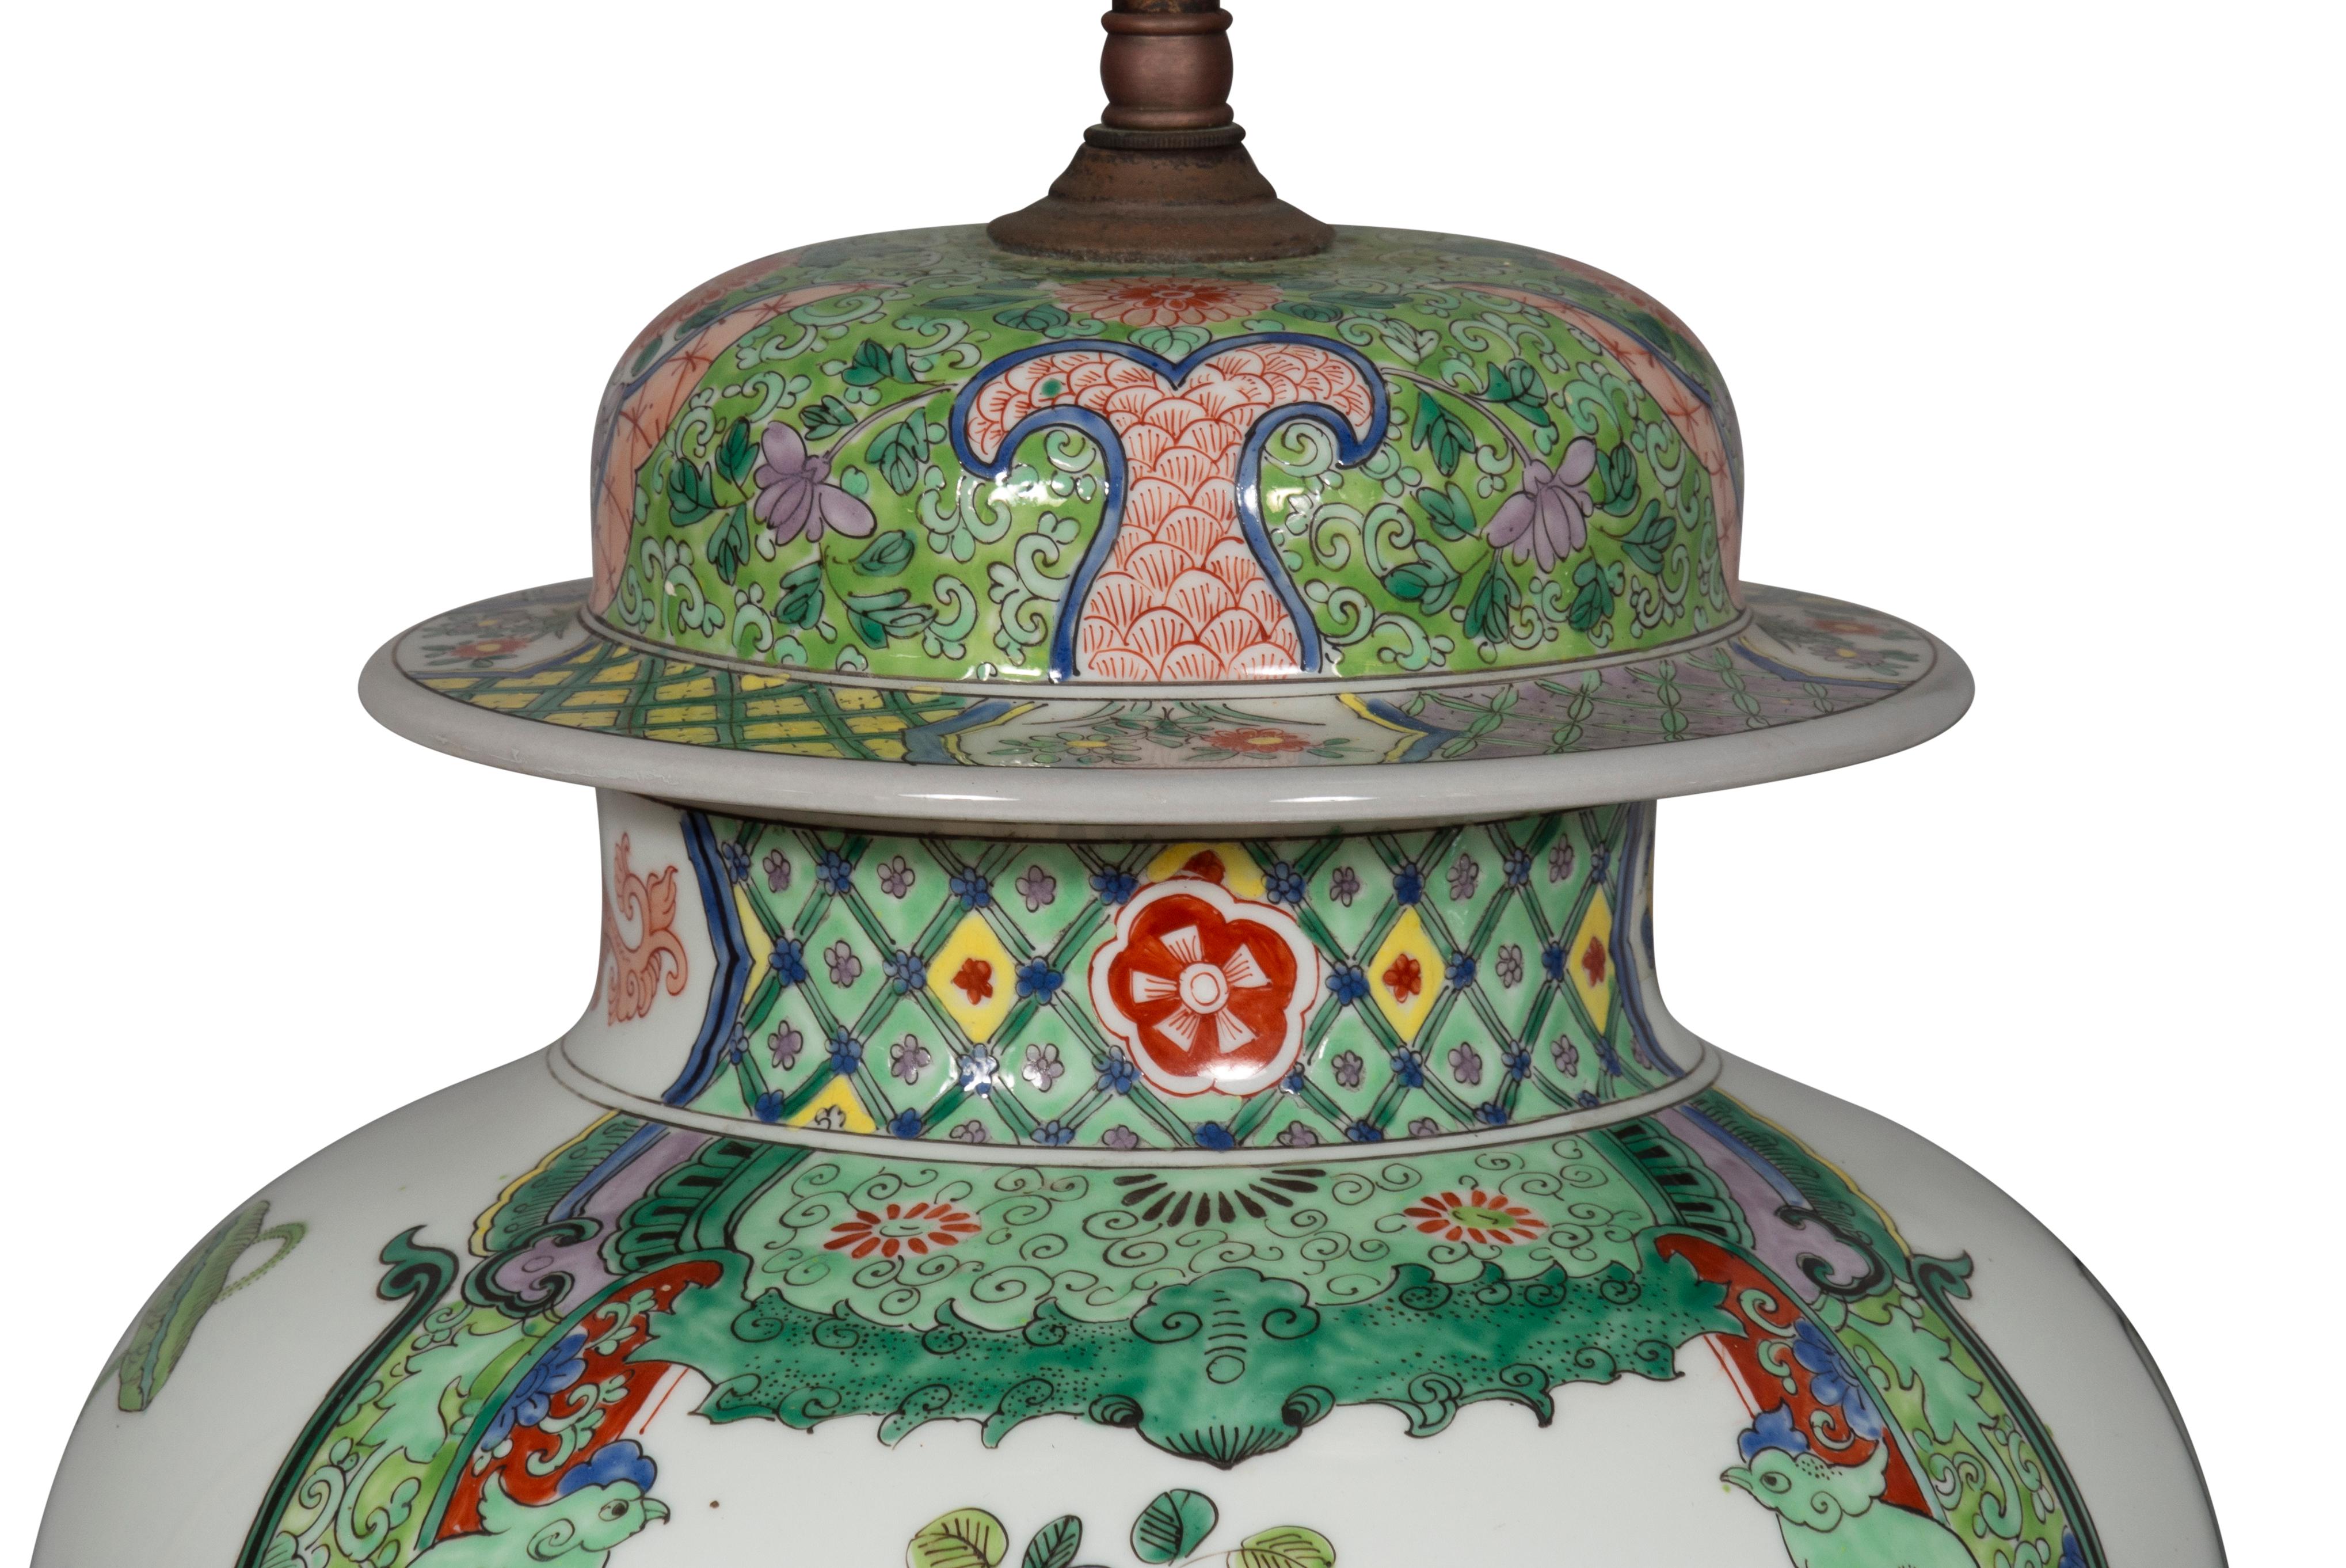 Pair of Samson Porcelain Ginger Jar Table Lamps in the Chinese Export Style For Sale 5